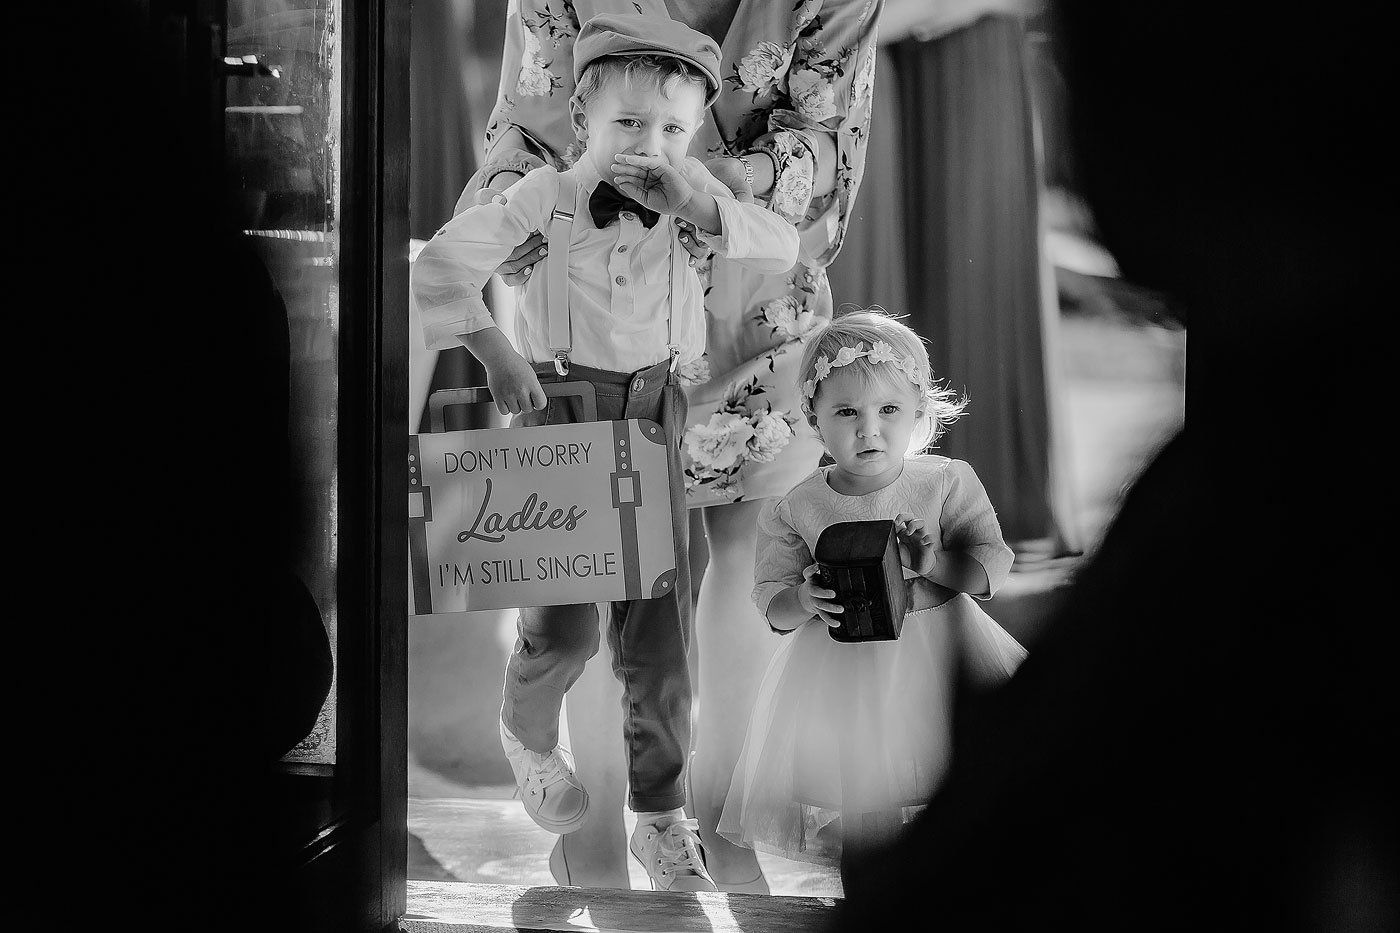 A moment with the ringbearer and flowergirl at a wedding in South Africa.